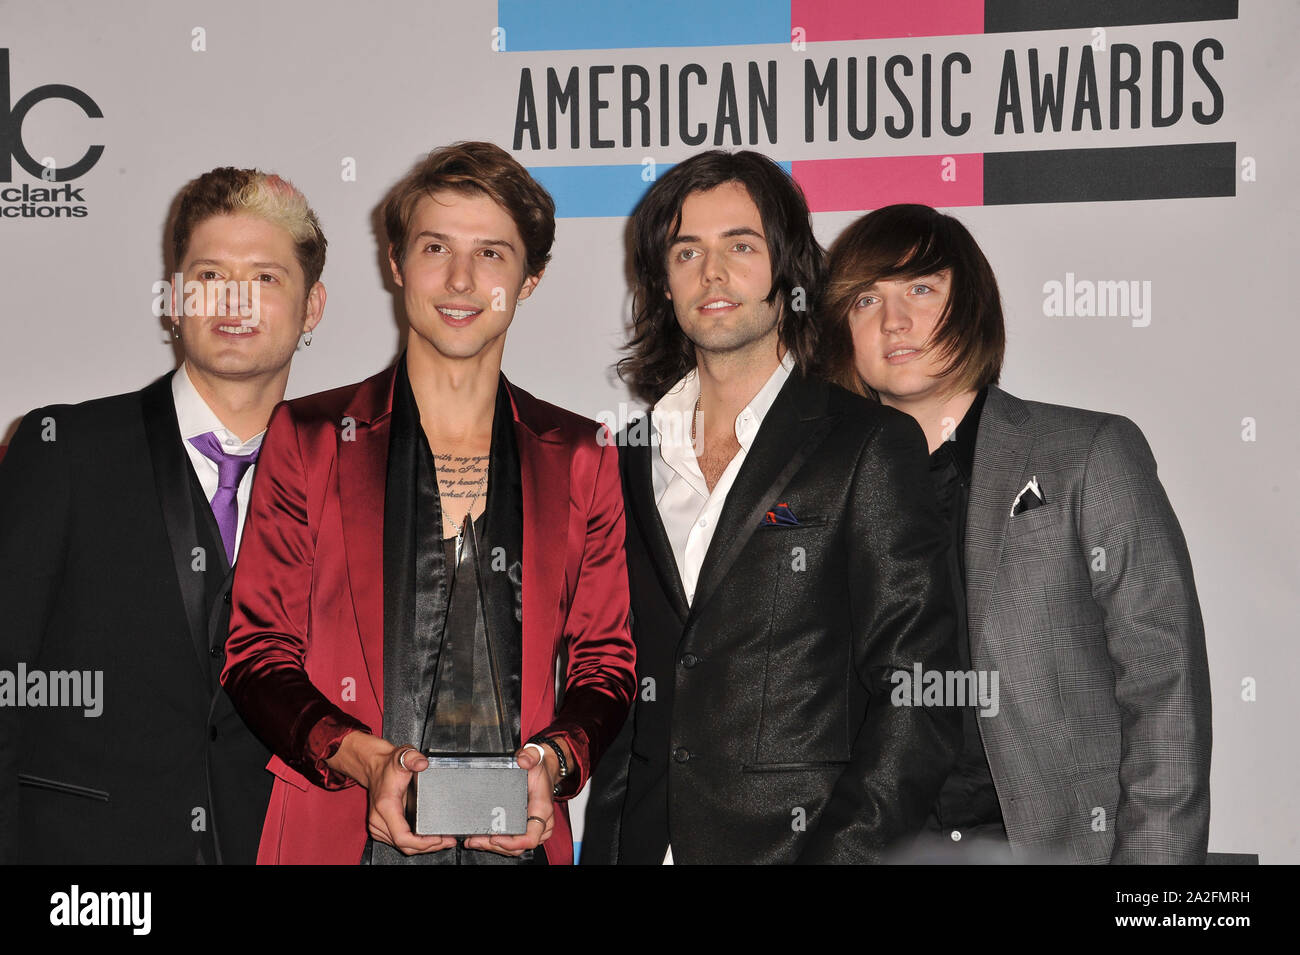 LOS ANGELES, CA. November 21, 2011: Hot Chelle Rae at the 2011 American Music Awards at the Nokia Theatre L.A. Live in downtown Los Angeles. © 2011 Paul Smith / Featureflash Stock Photo